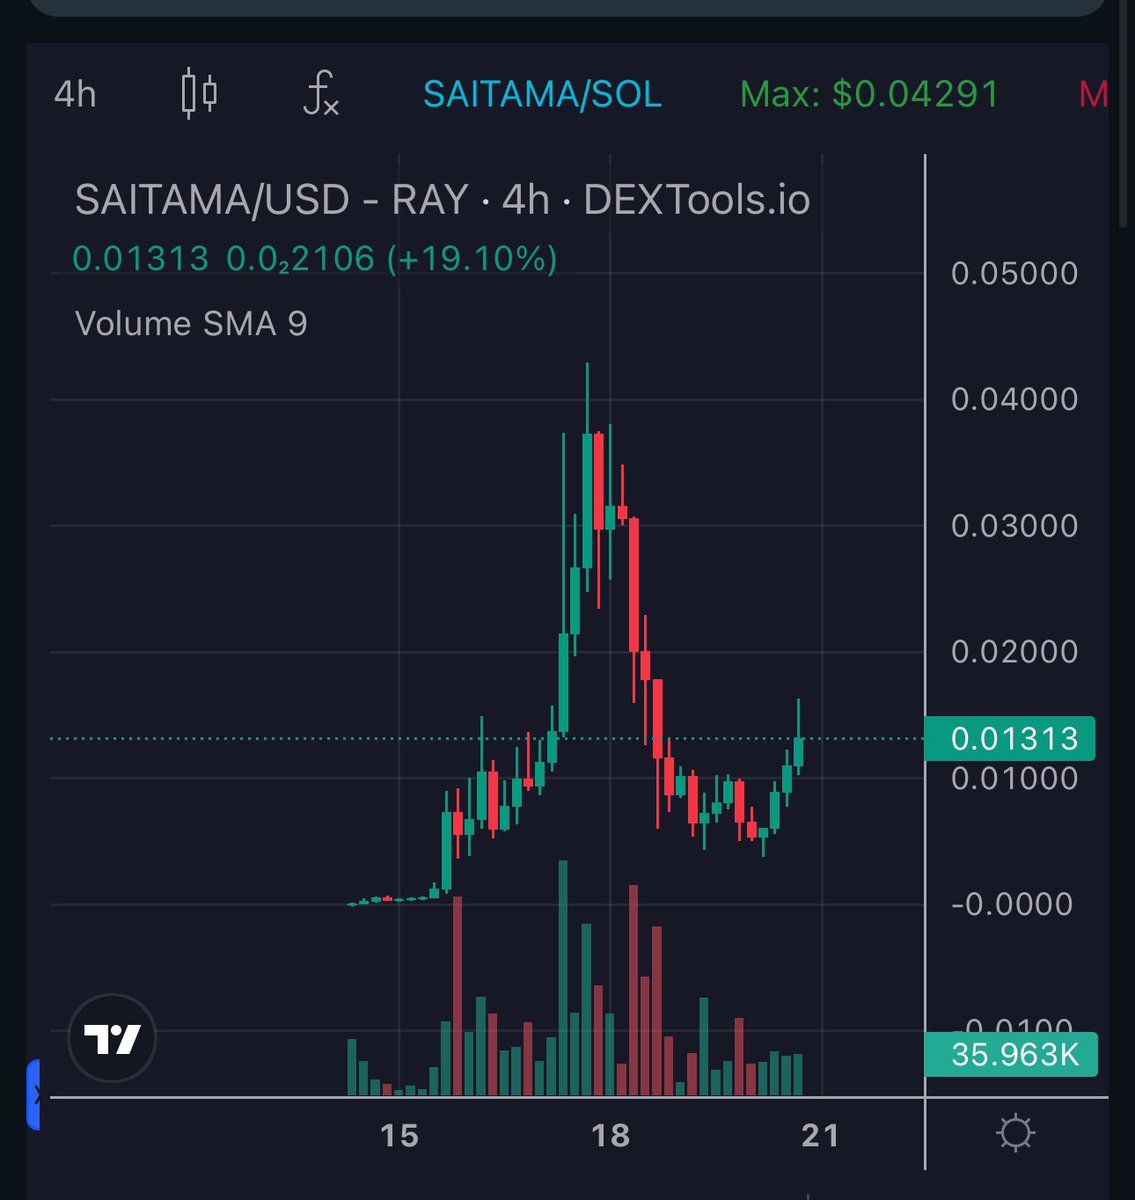 Send #Saitama to keep the Raccoons out of your garbage cans!!!! 🦝 🗑️ BUYYYYYY SSSSAAAIIITTTAAAMMMA 🙌 (Look at that sexy ass comeback chart 🥰) 🙌 $stc #saitachaincoin #pepe $pepe $andy #landwolf #solana #bitcoin #ethereum $eth $brett $andy